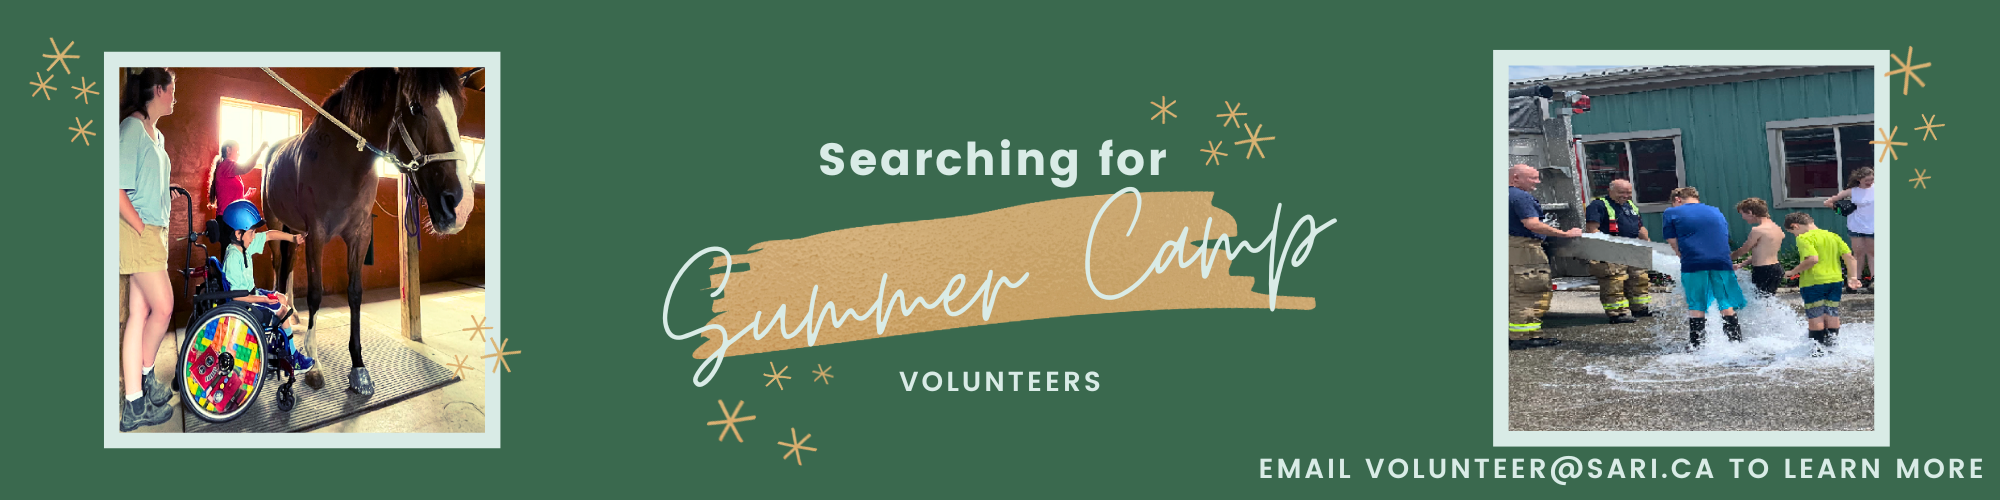 Searching for Volunteers (2).png